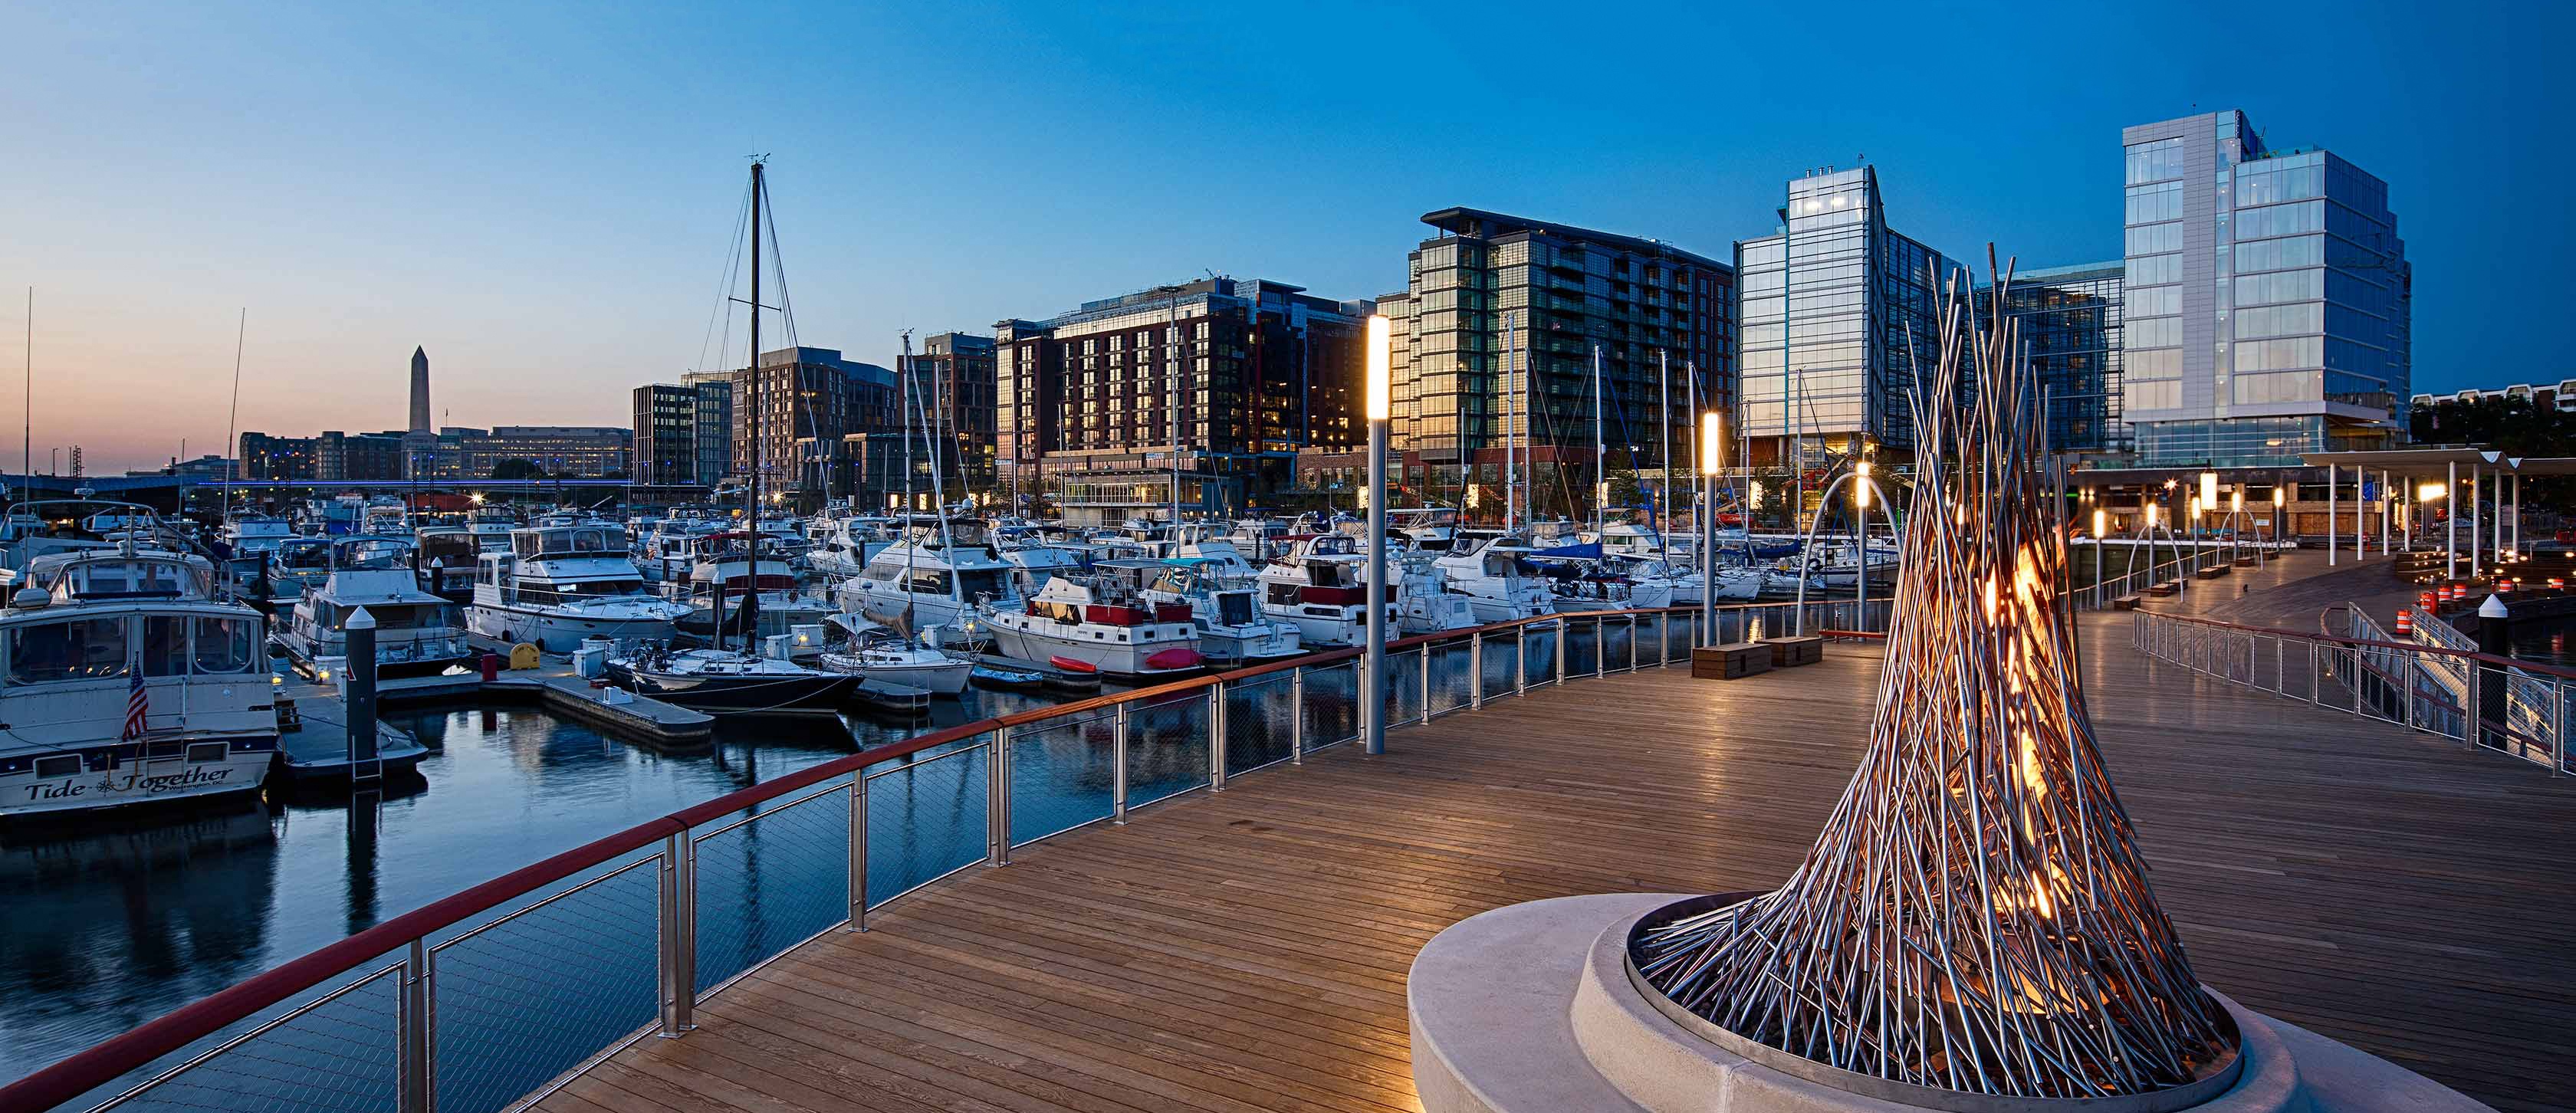 5 Reasons to Visit the New District Wharf in Washington, D.C.